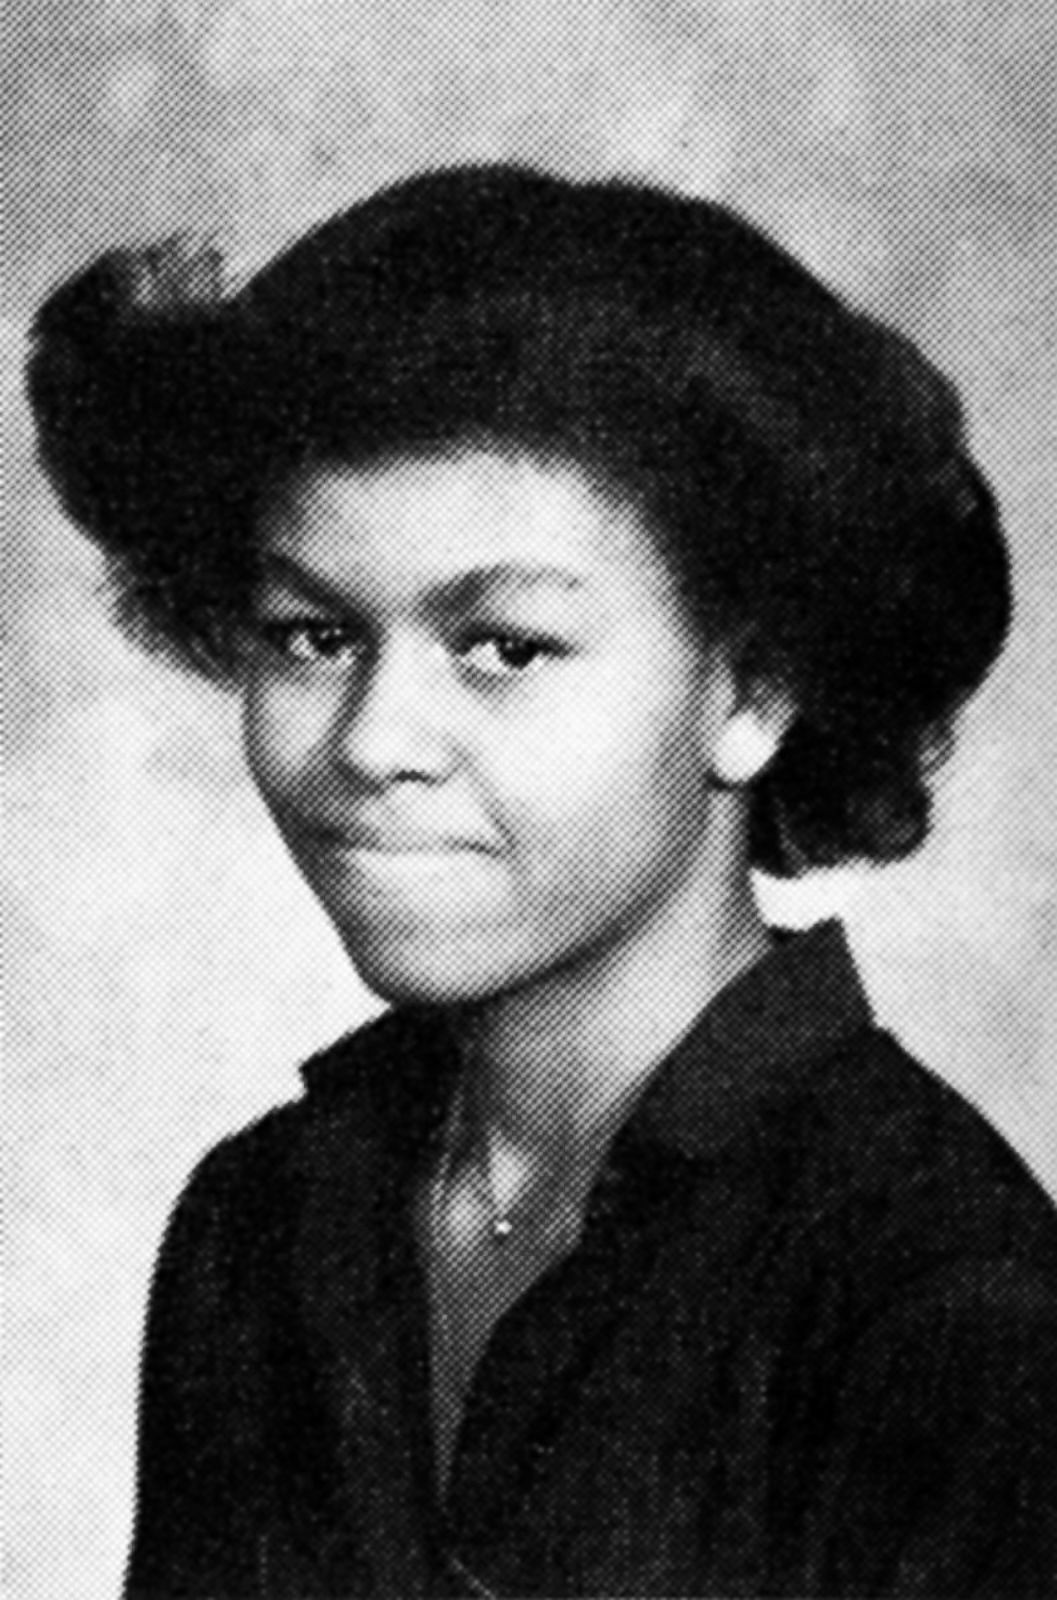 Picture | Michelle Obama Through the Years - ABC News1057 x 1600